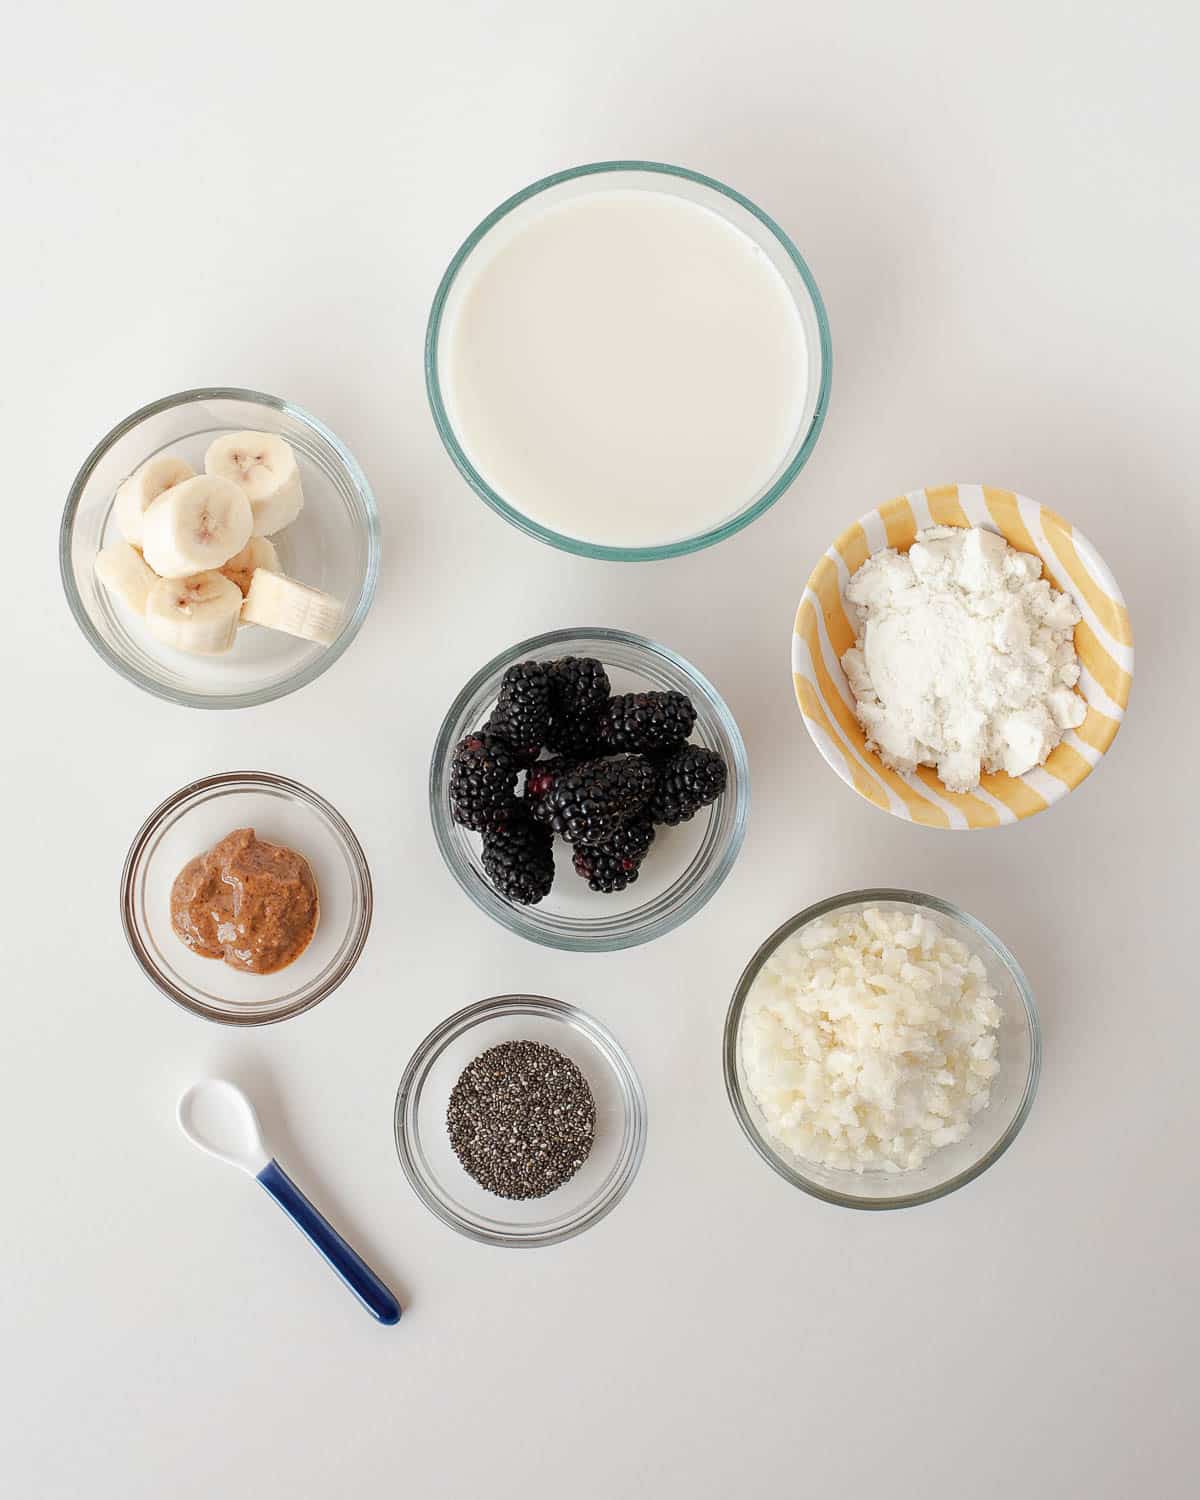 Ingredients for blackberry almond smoothie